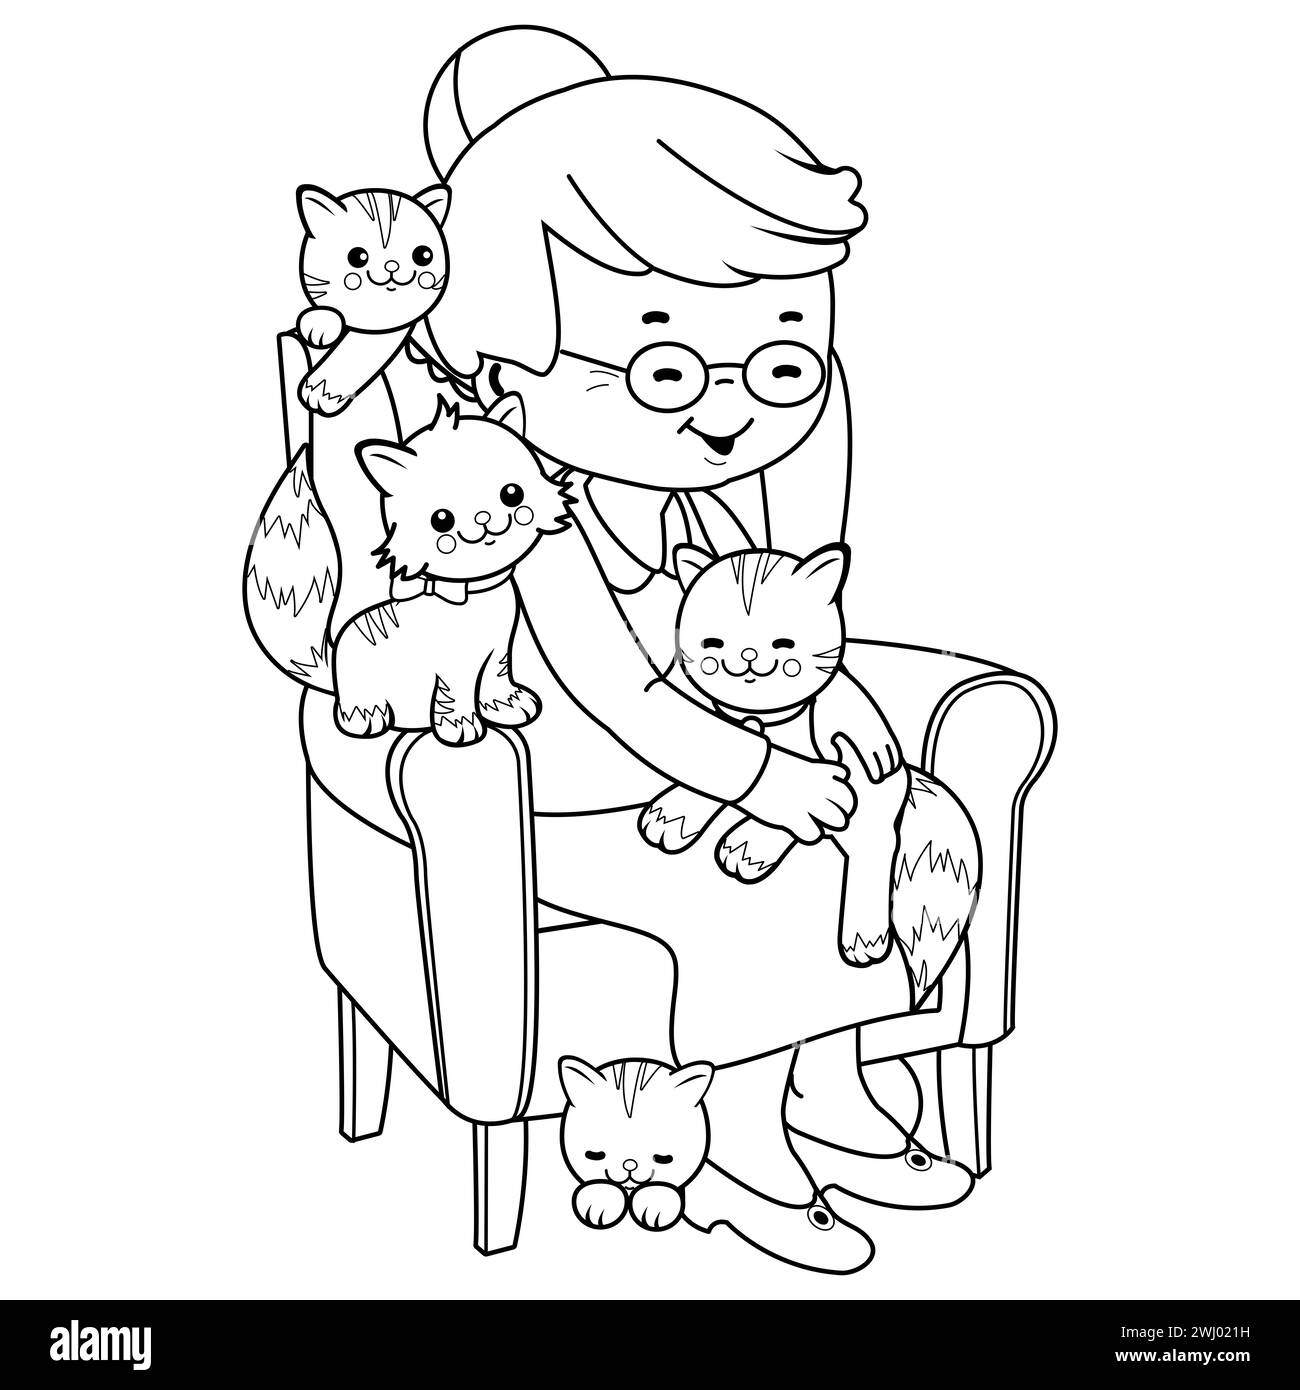 Old woman at home sitting in her armchair with her cats. Grandma in her armchair in her living room with her pet kittens. Black and white. Stock Photo